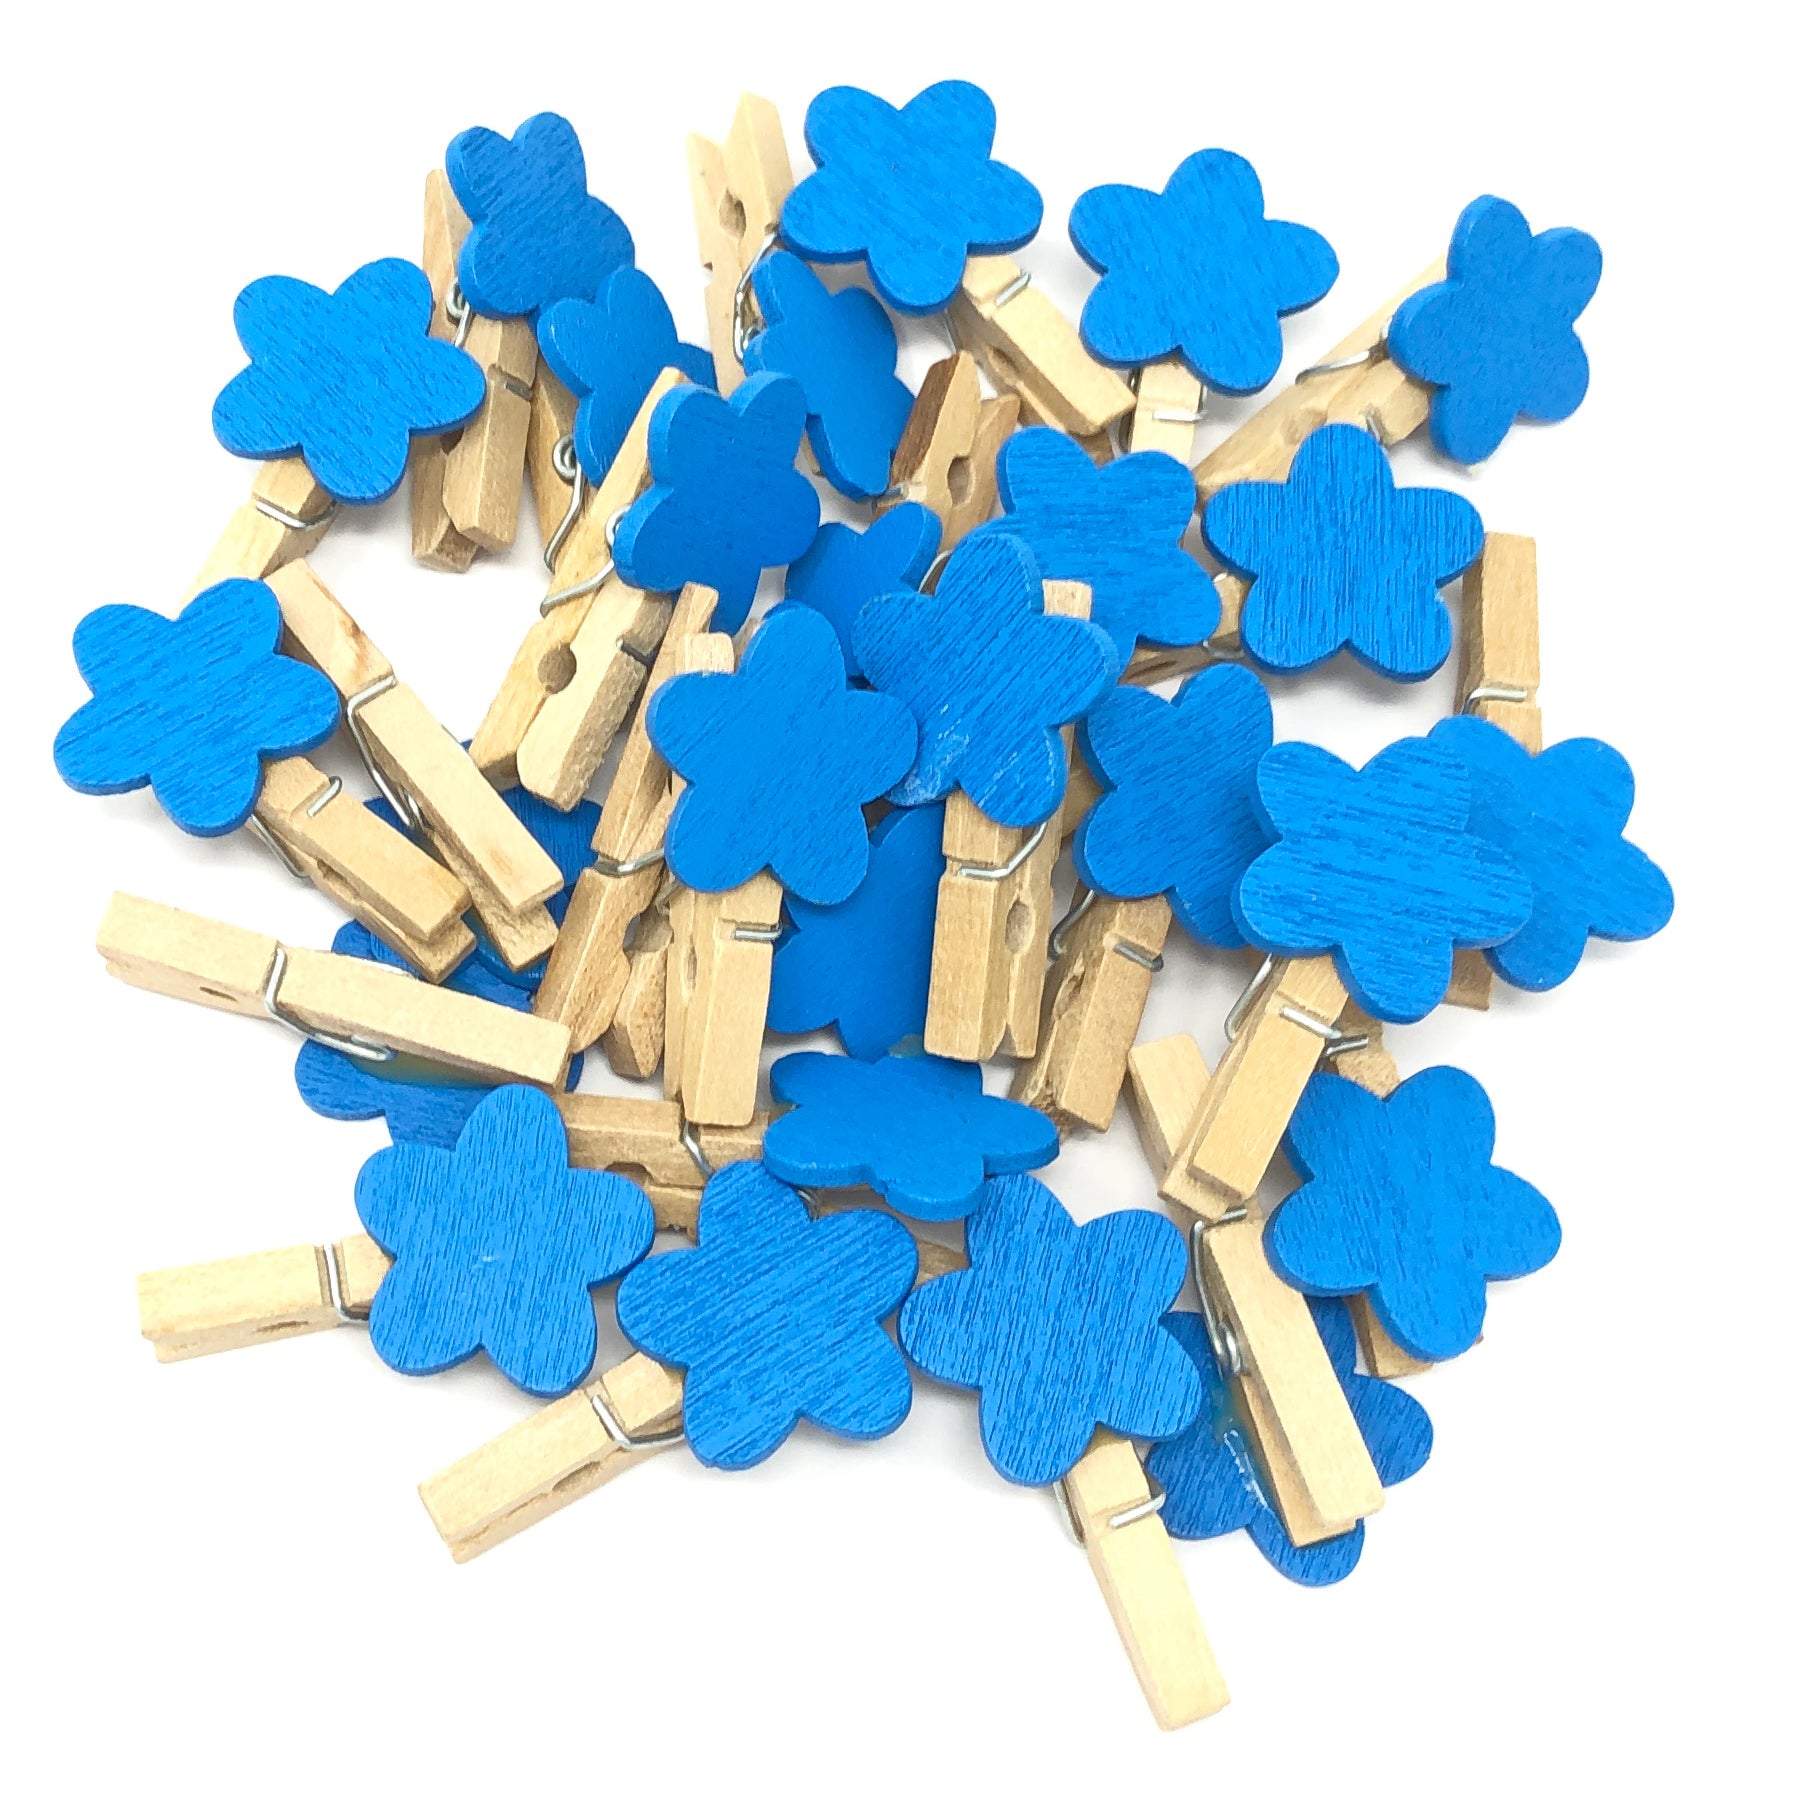 Blue 30mm Natural Pegs with 18mm Coloured Wooden Flowers